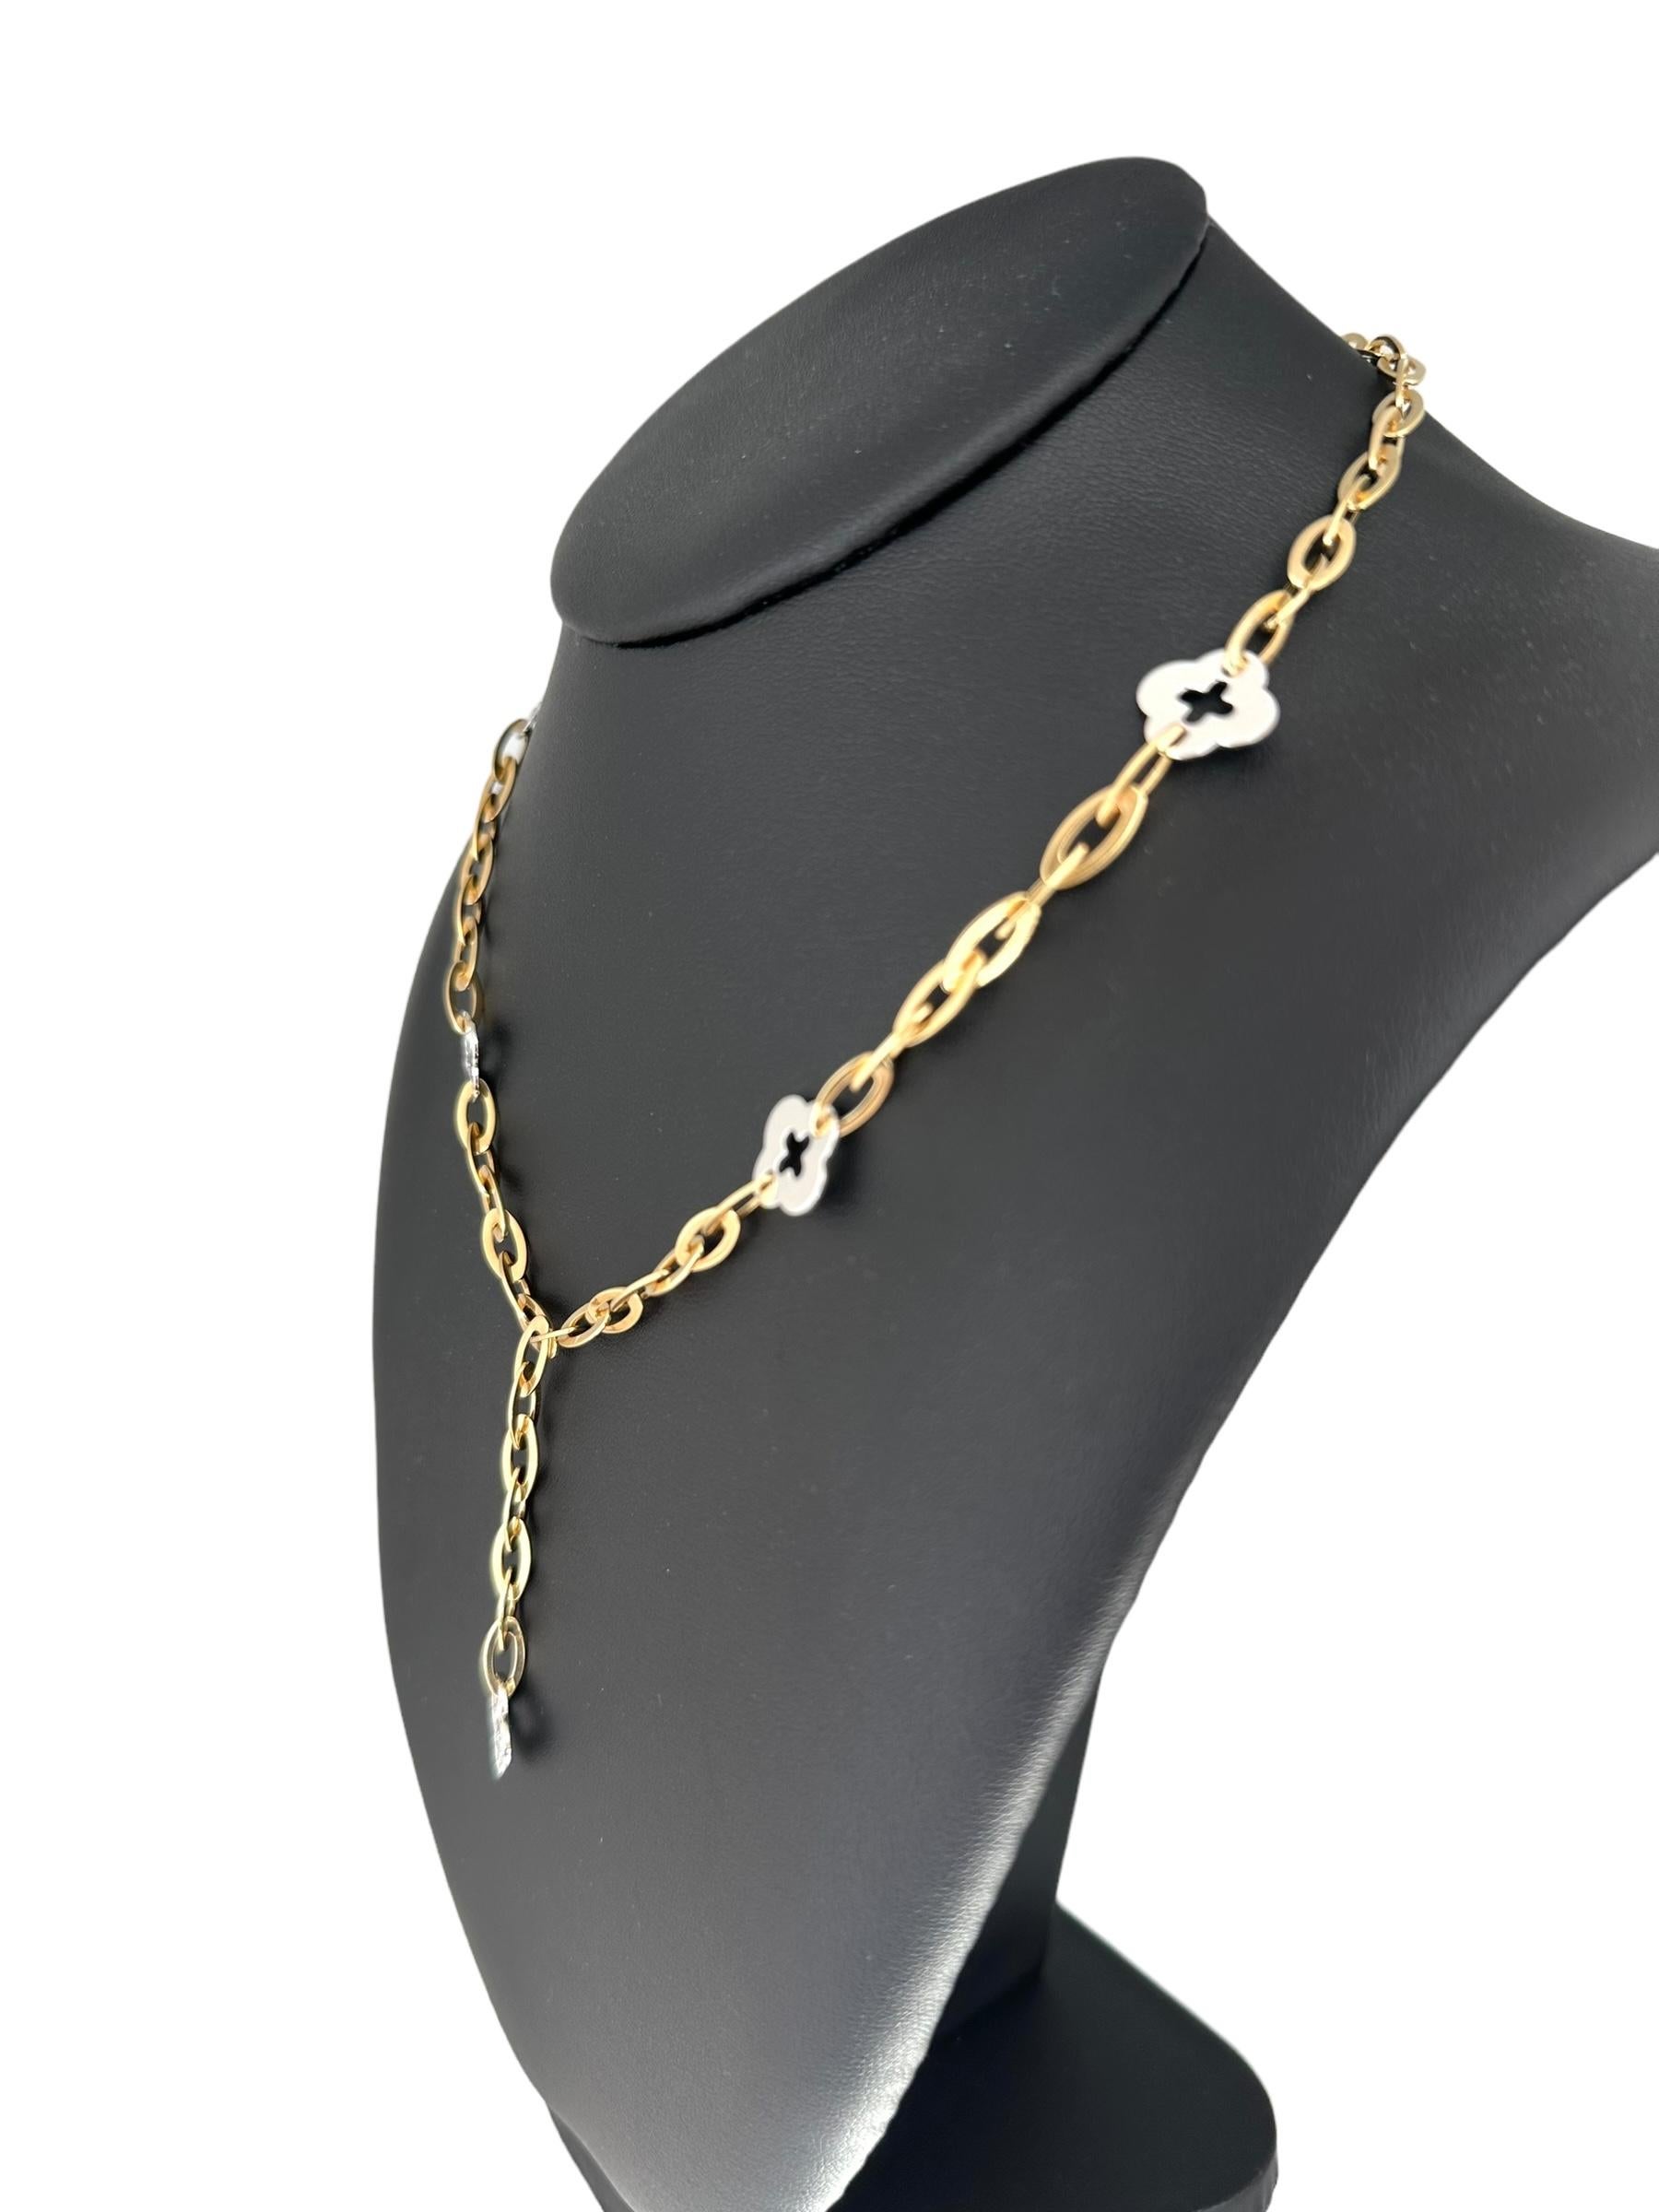 This Roberto Coin Clover Chic and Shine Gold Necklace is a stunning piece of jewelry that exudes sophistication and style. Crafted from high-quality 18kt yellow gold, this links necklace features delicate clovers in white gold, adding a touch of